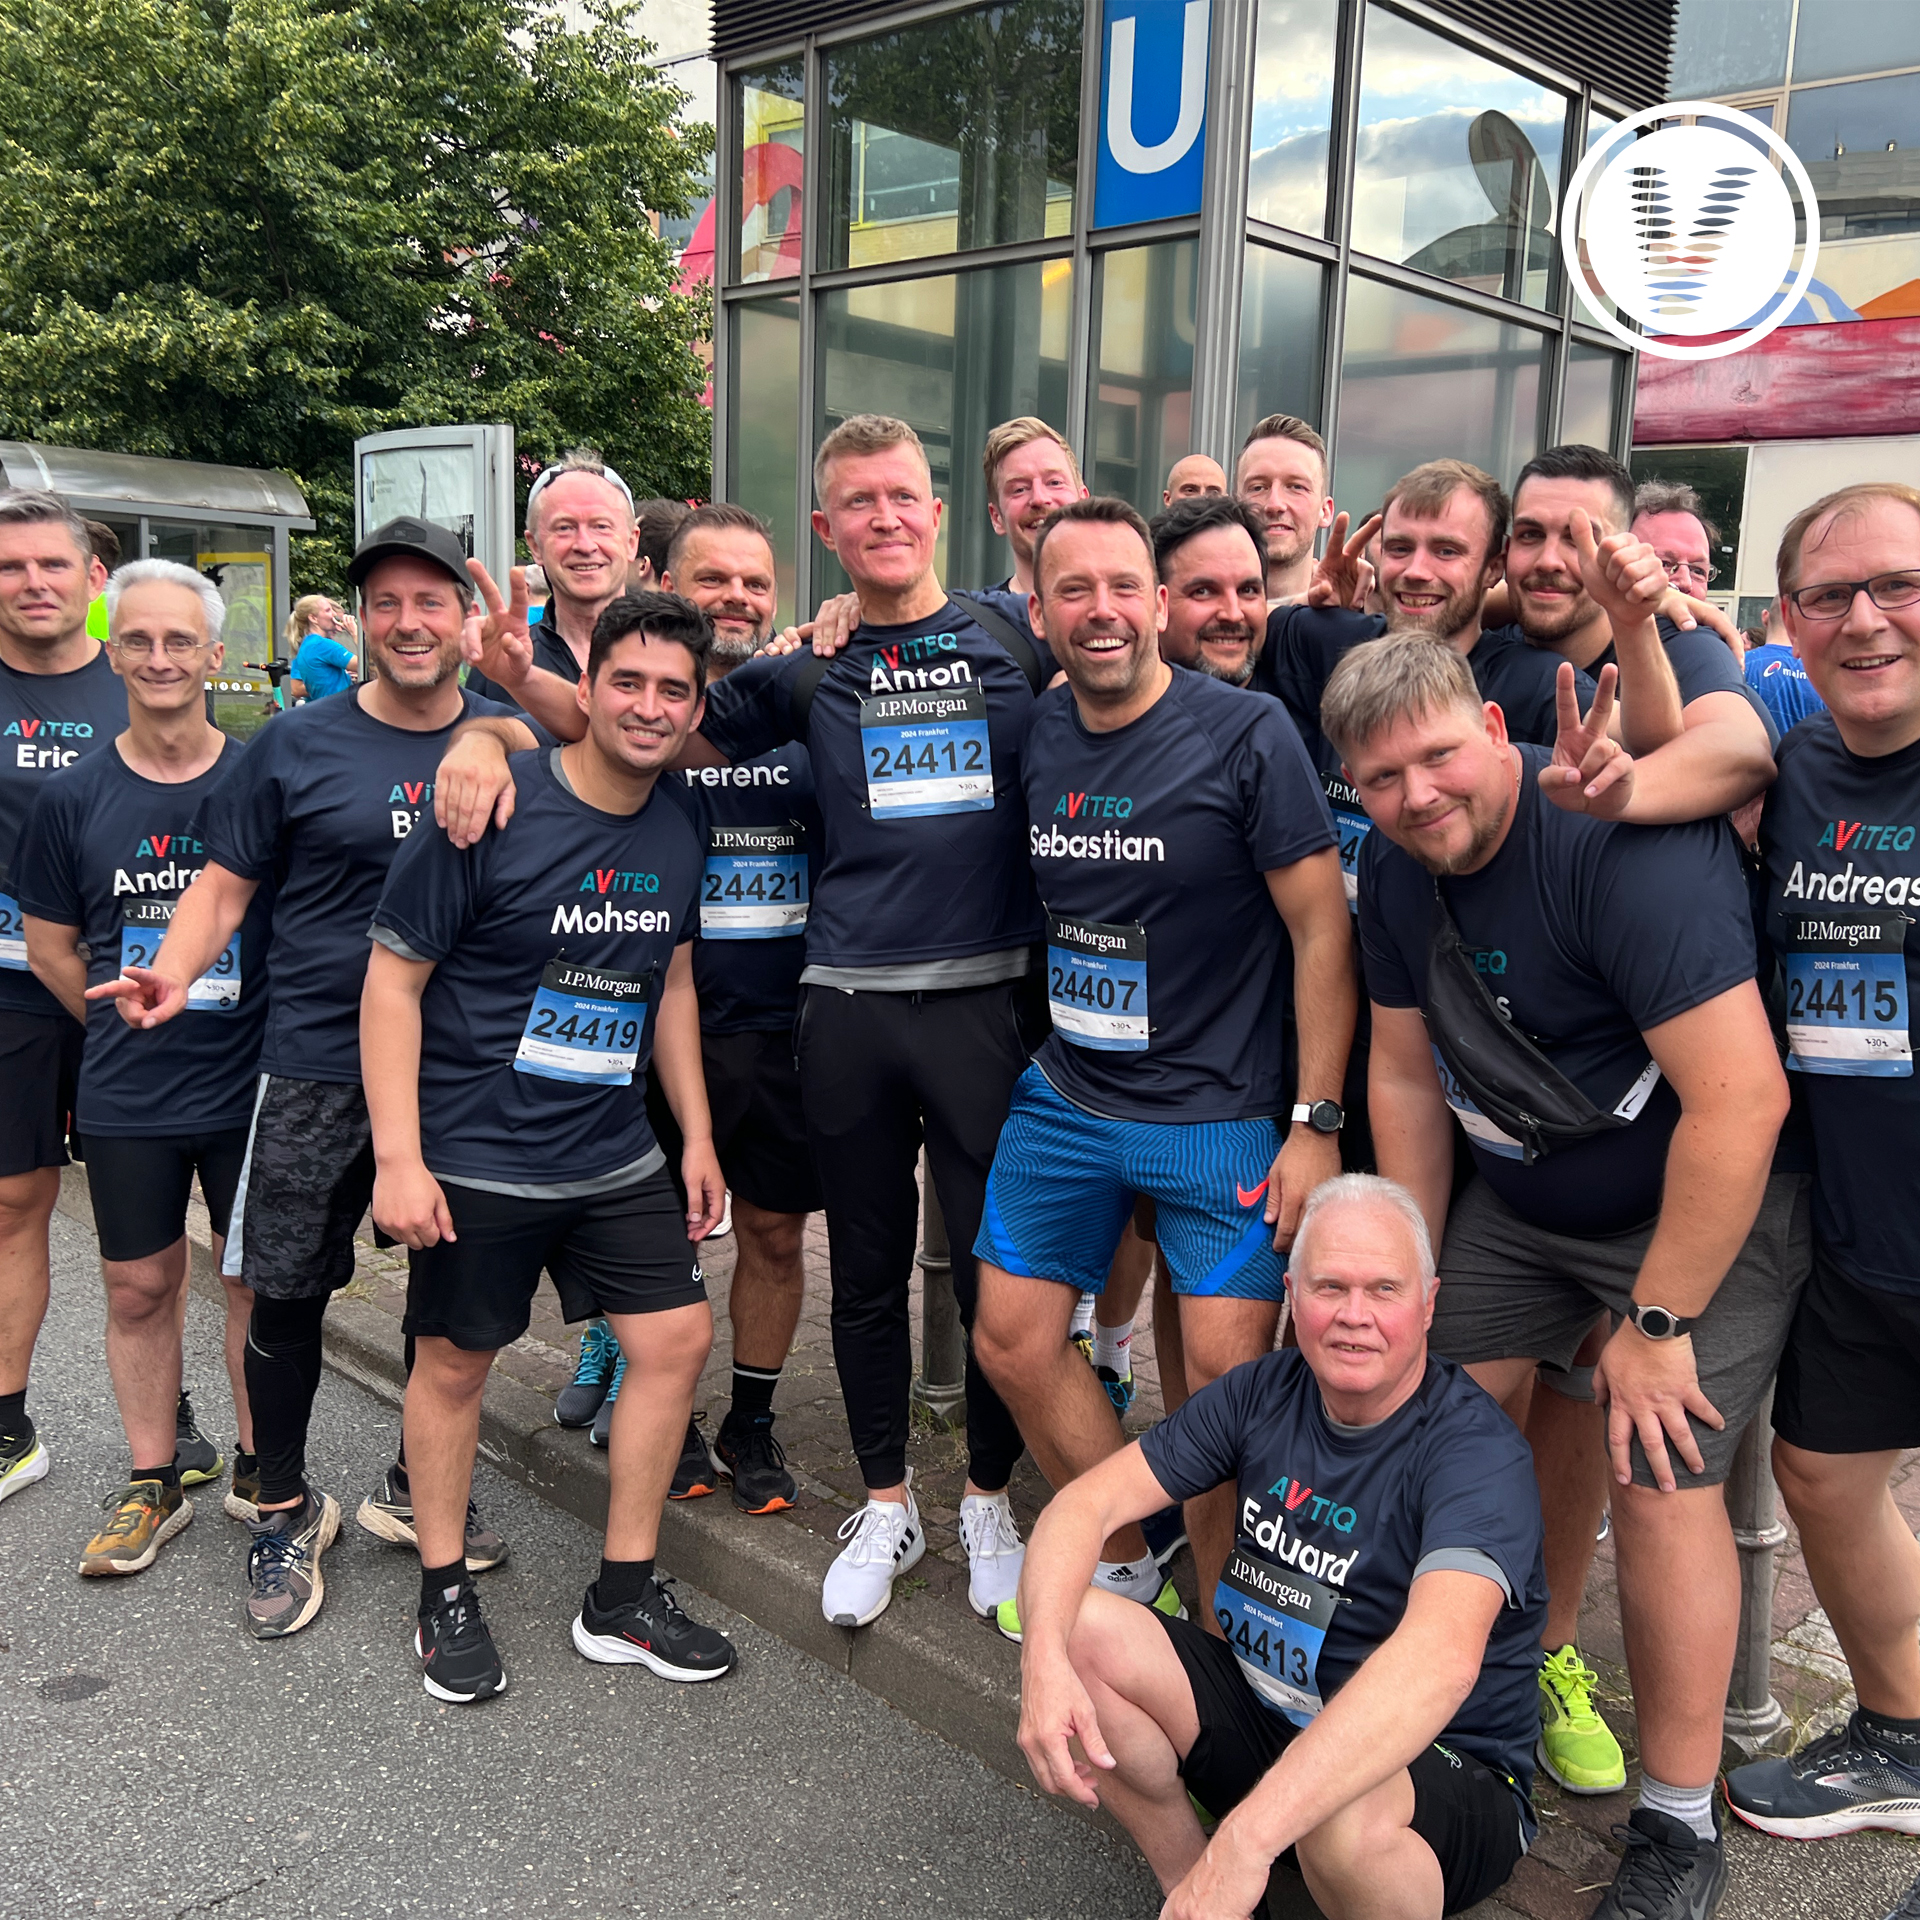 Celebrating team spirit for the 10th time at the JP Morgan Run